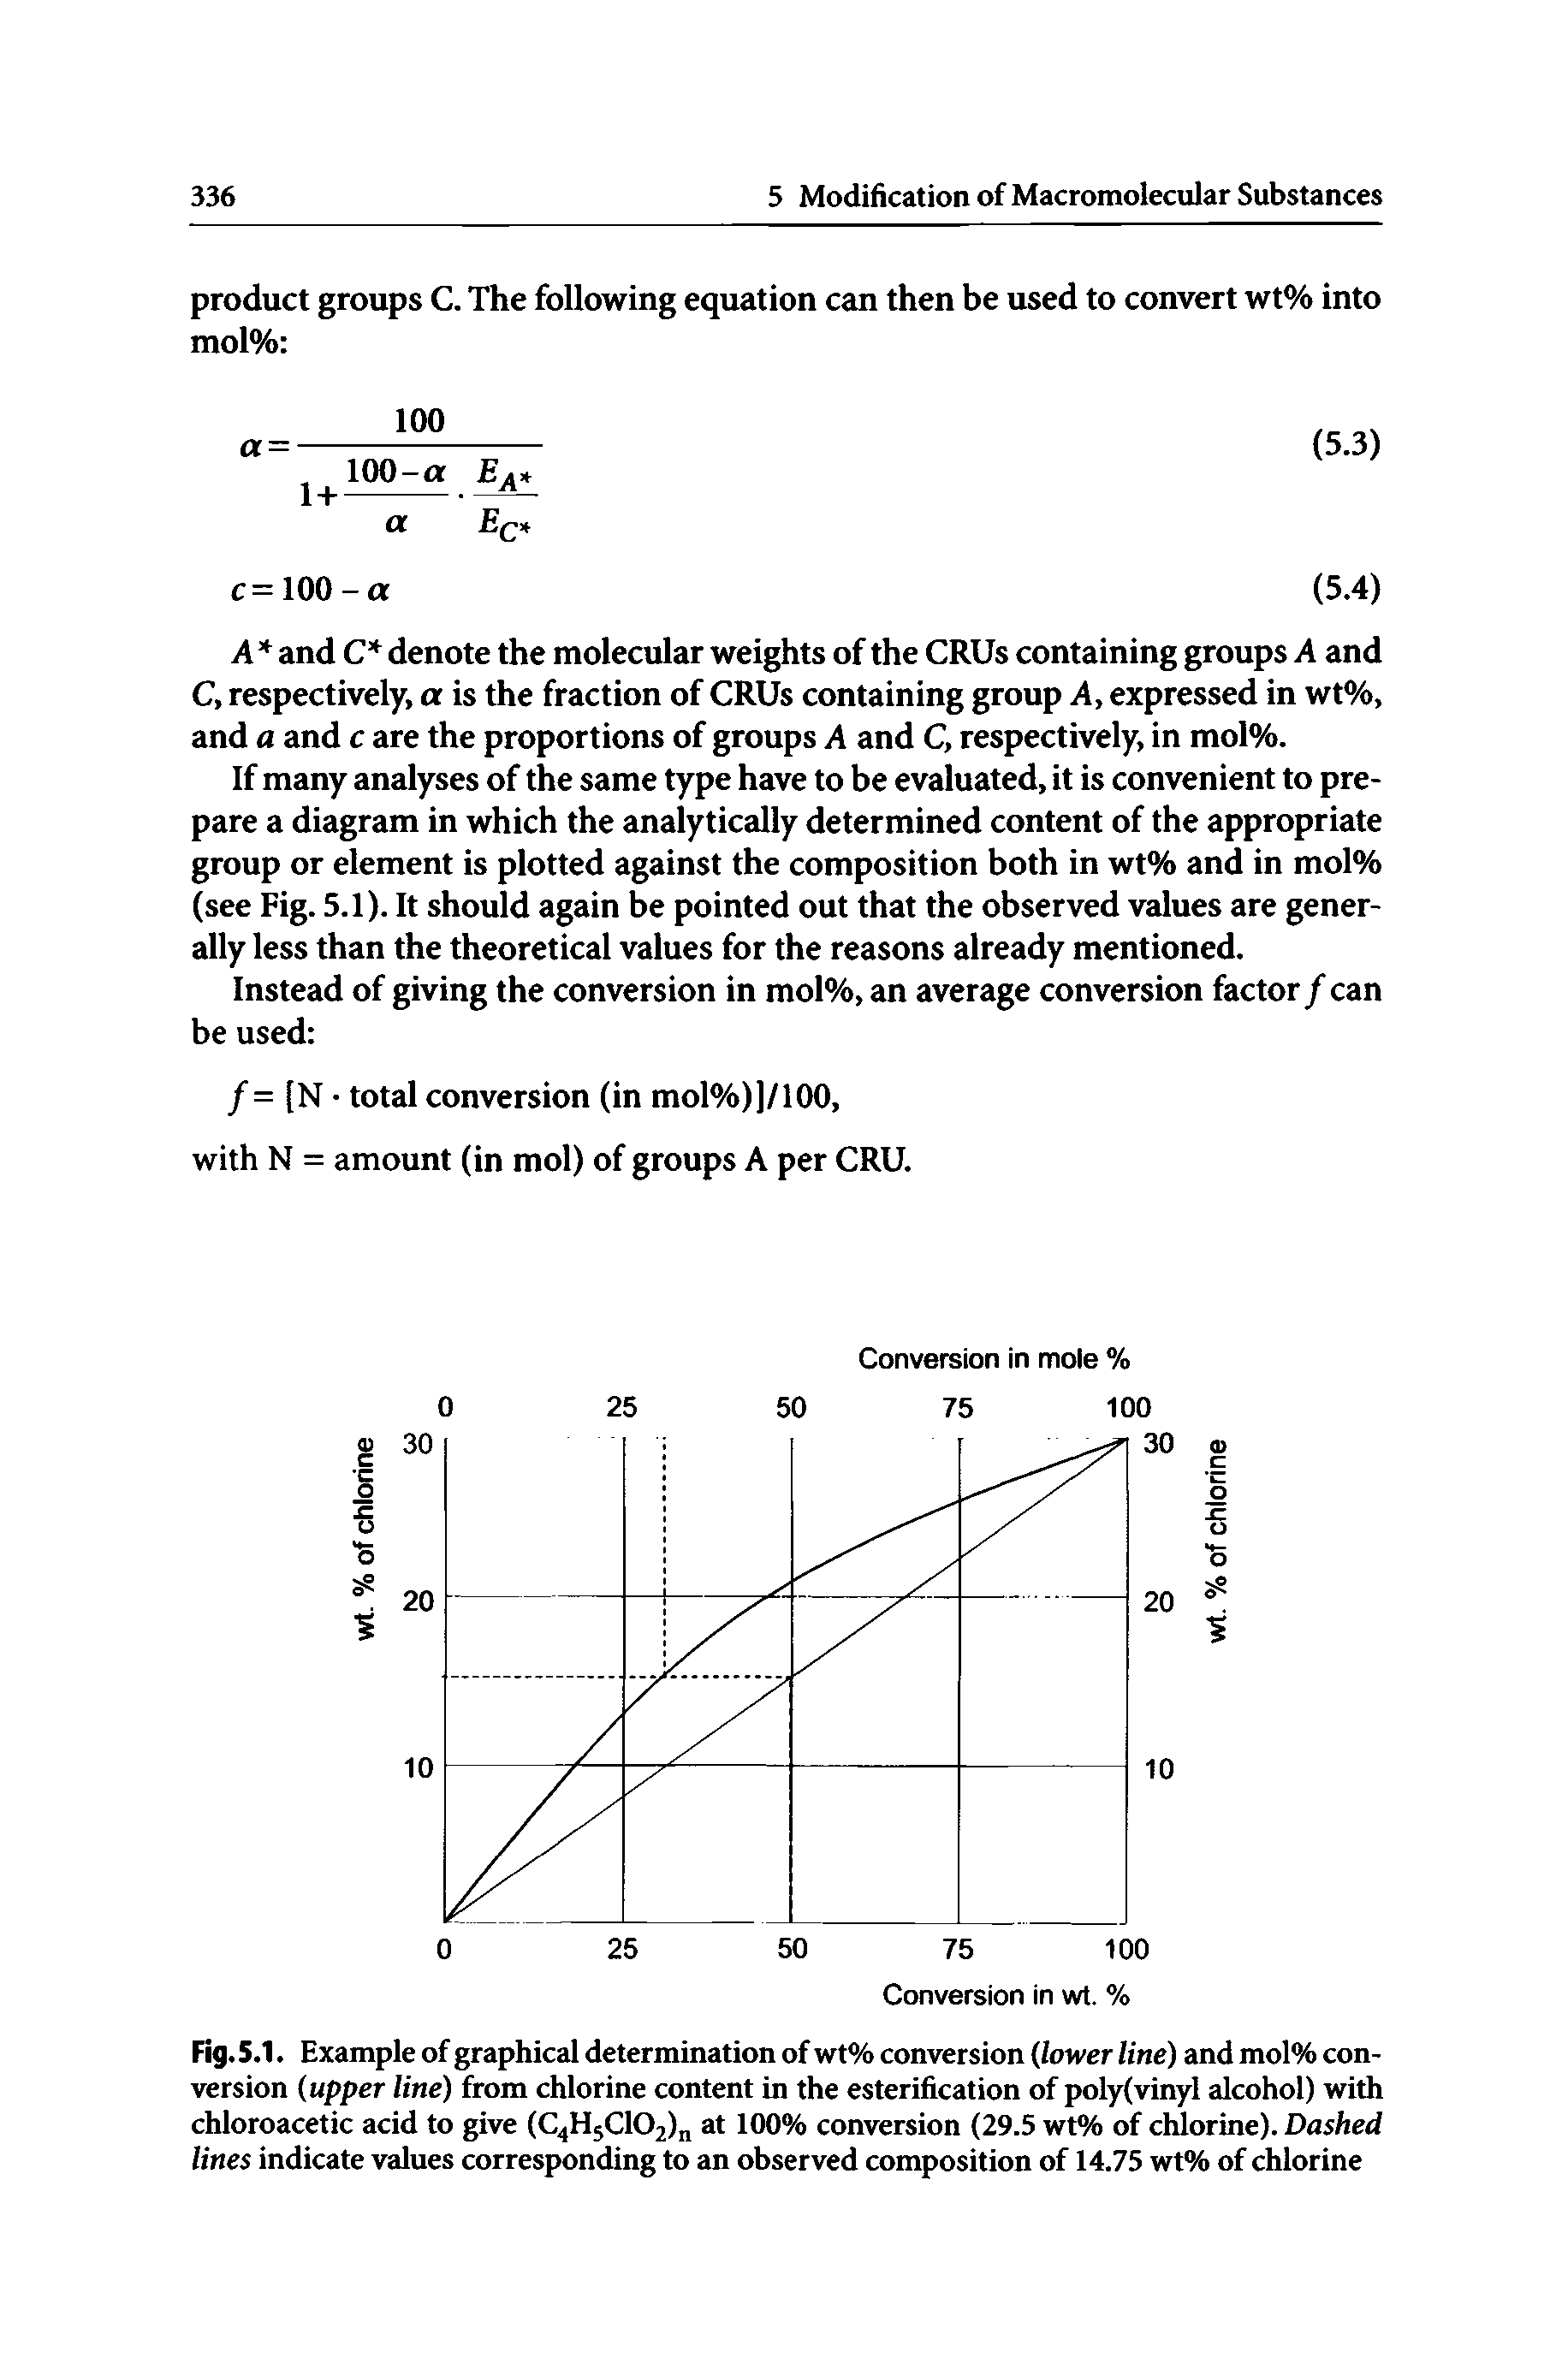 Fig. 5.1. Example of graphical determination of wt% conversion lower line) and mol% conversion (upper line) from chlorine content in the esterification of poly(vinyl alcohol) with chloroacetic acid to give (C4H5C102) at 100% conversion (29.5 wt% of chlorine). Dashed lines indicate values corresponding to an observed composition of 14.75 wt% of chlorine...